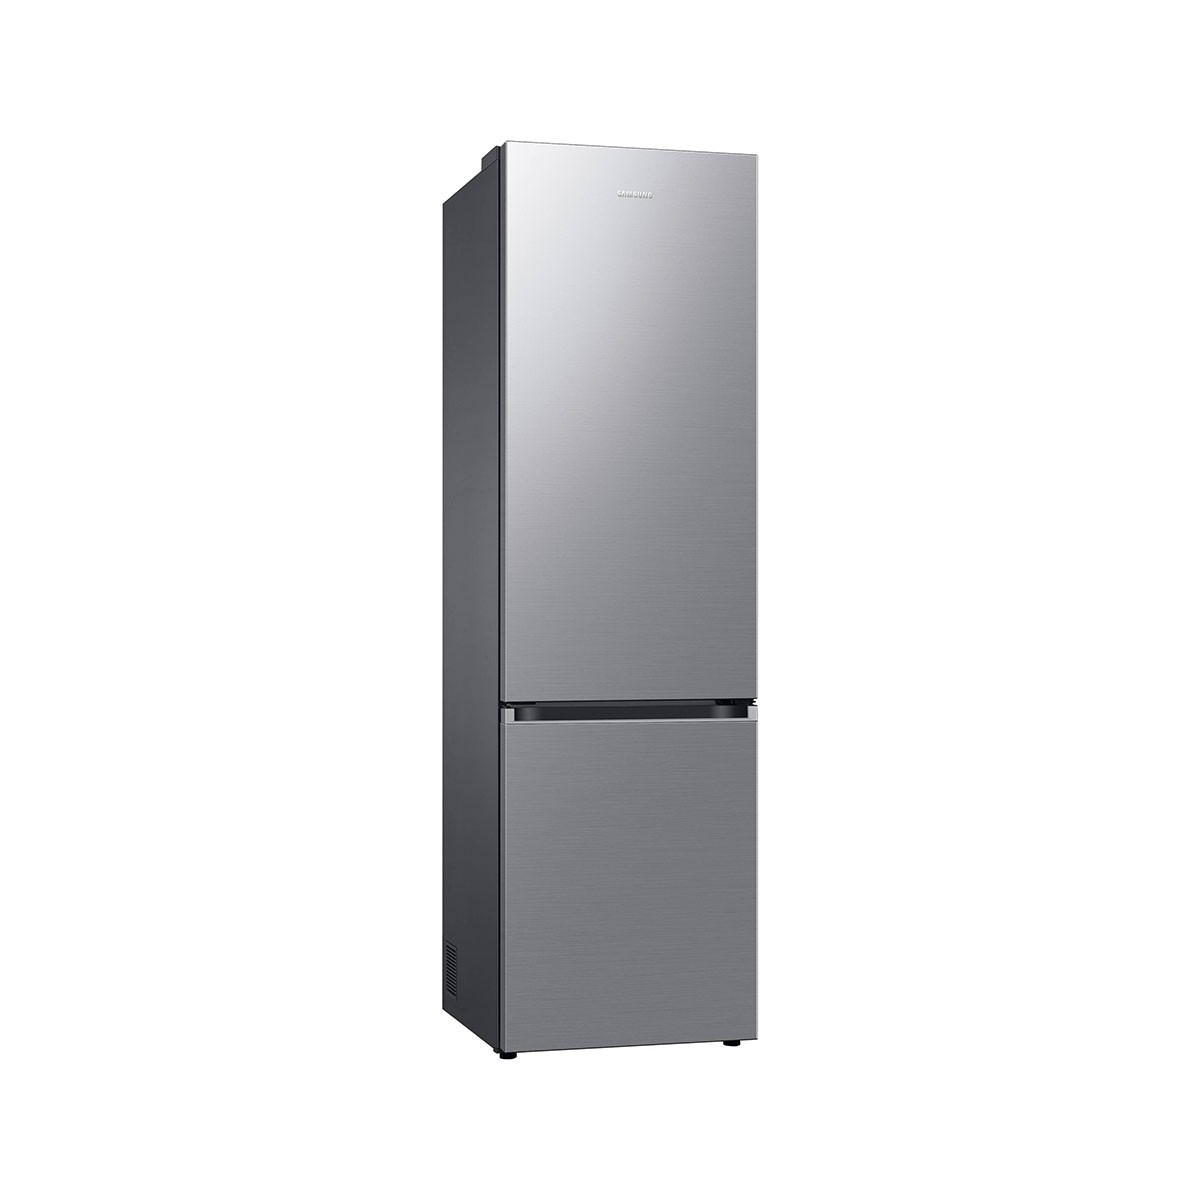 Samsung RB38T607BS9/EF 387L Gray Combined Refrigerator